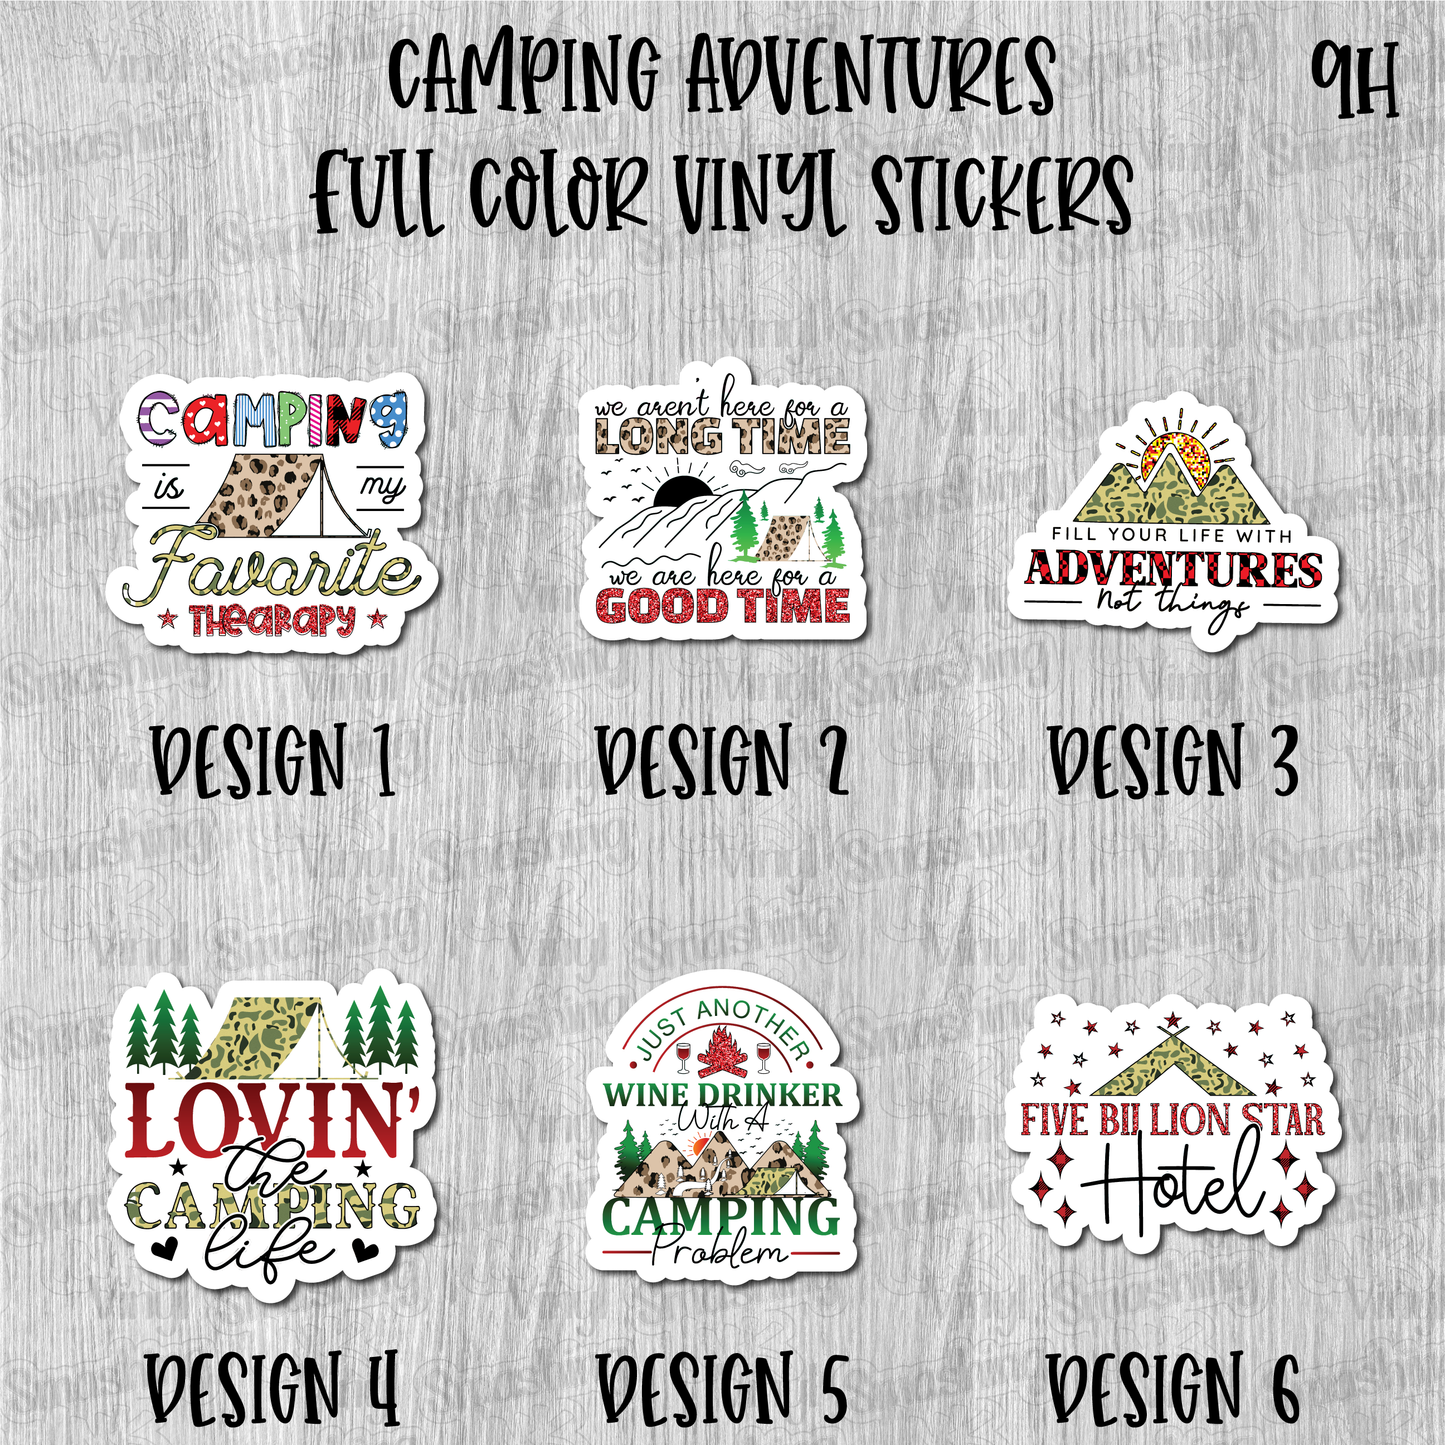 Camping Adventures - Full Color Vinyl Stickers (SHIPS IN 3-7 BUS DAYS)